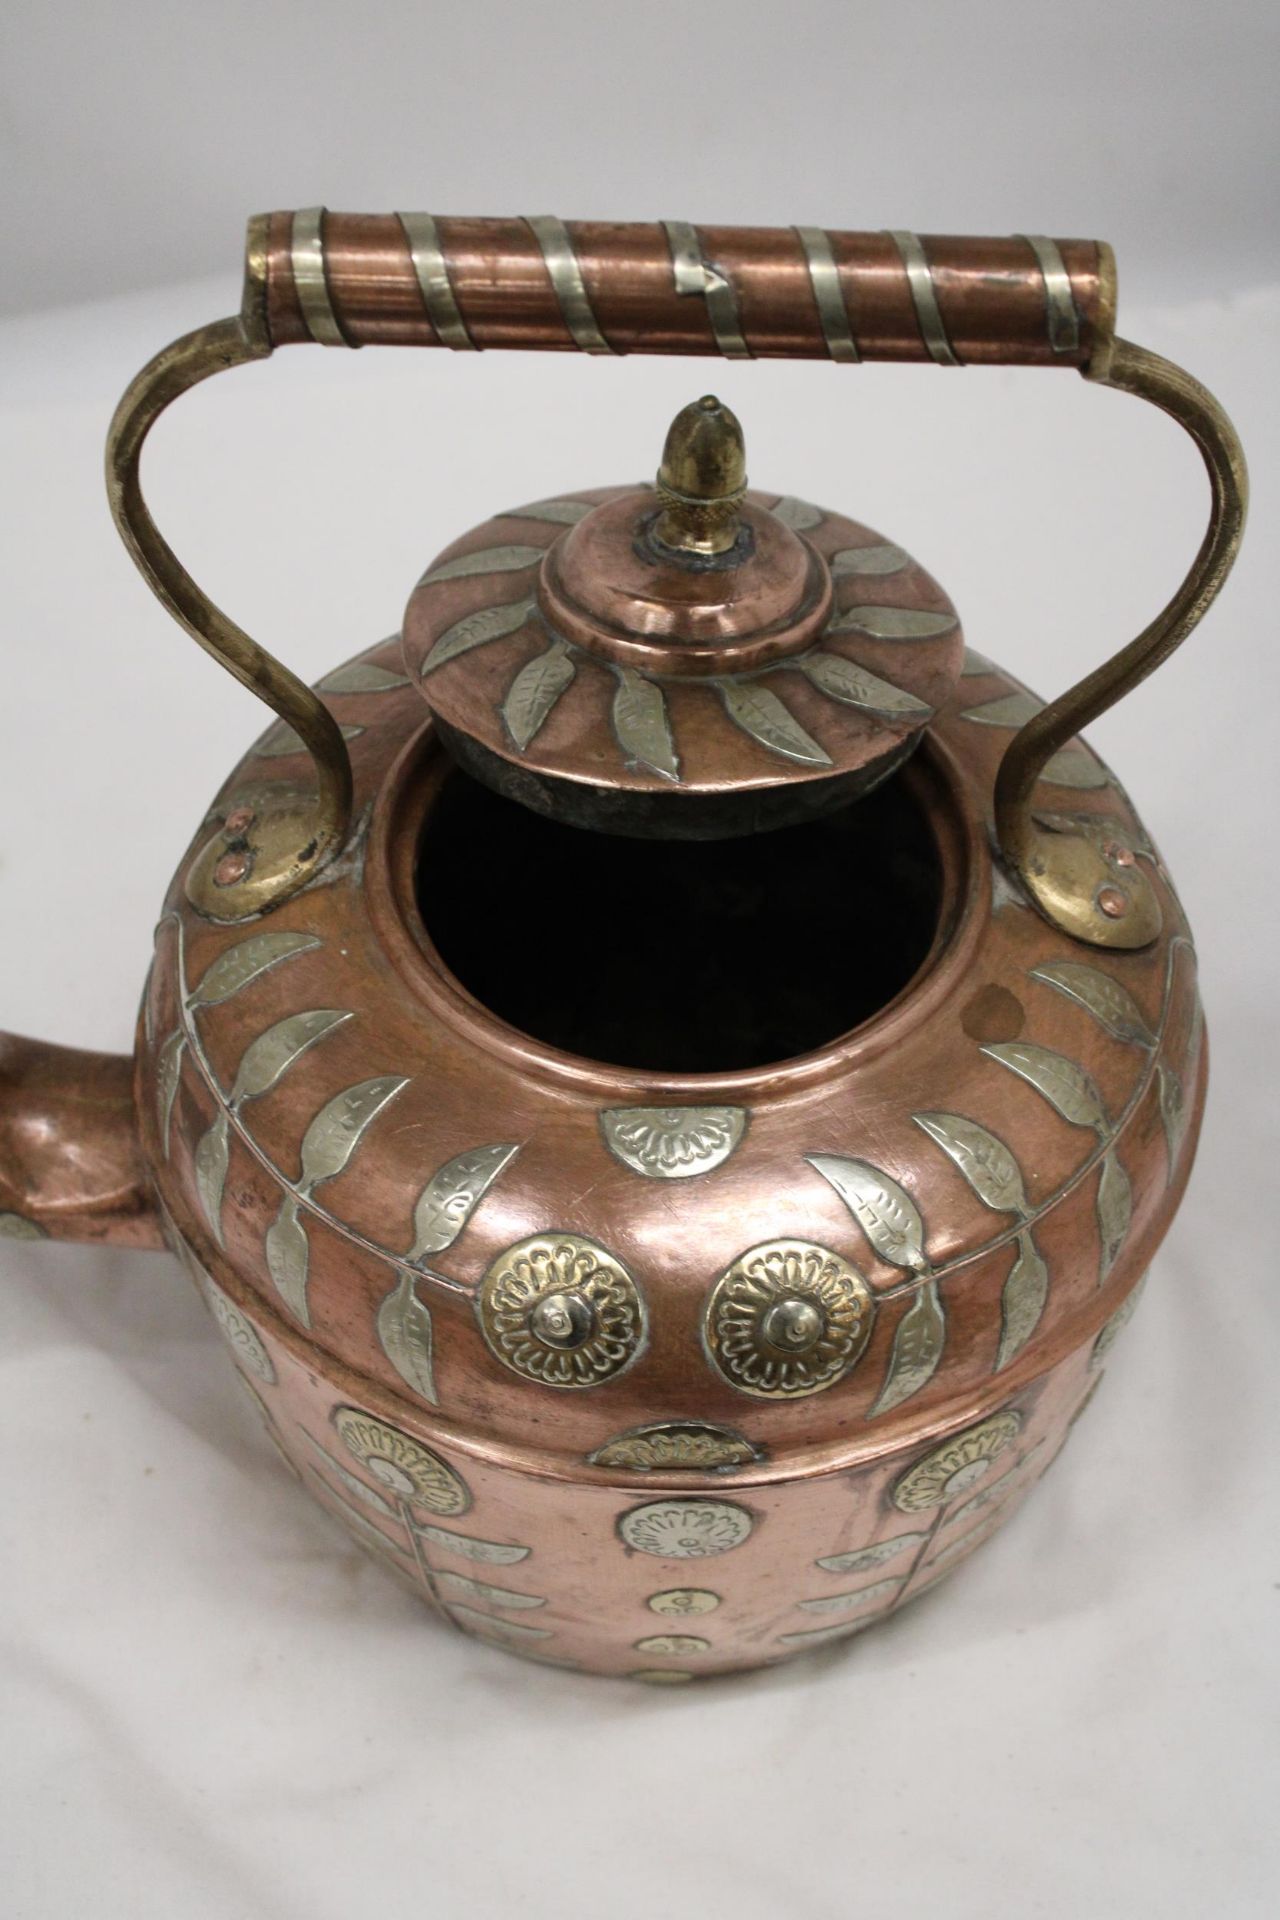 A 1900'S VICTORIAN COPPER KETTLE WITH BRASS FLORAL DETAIL - Image 5 of 5